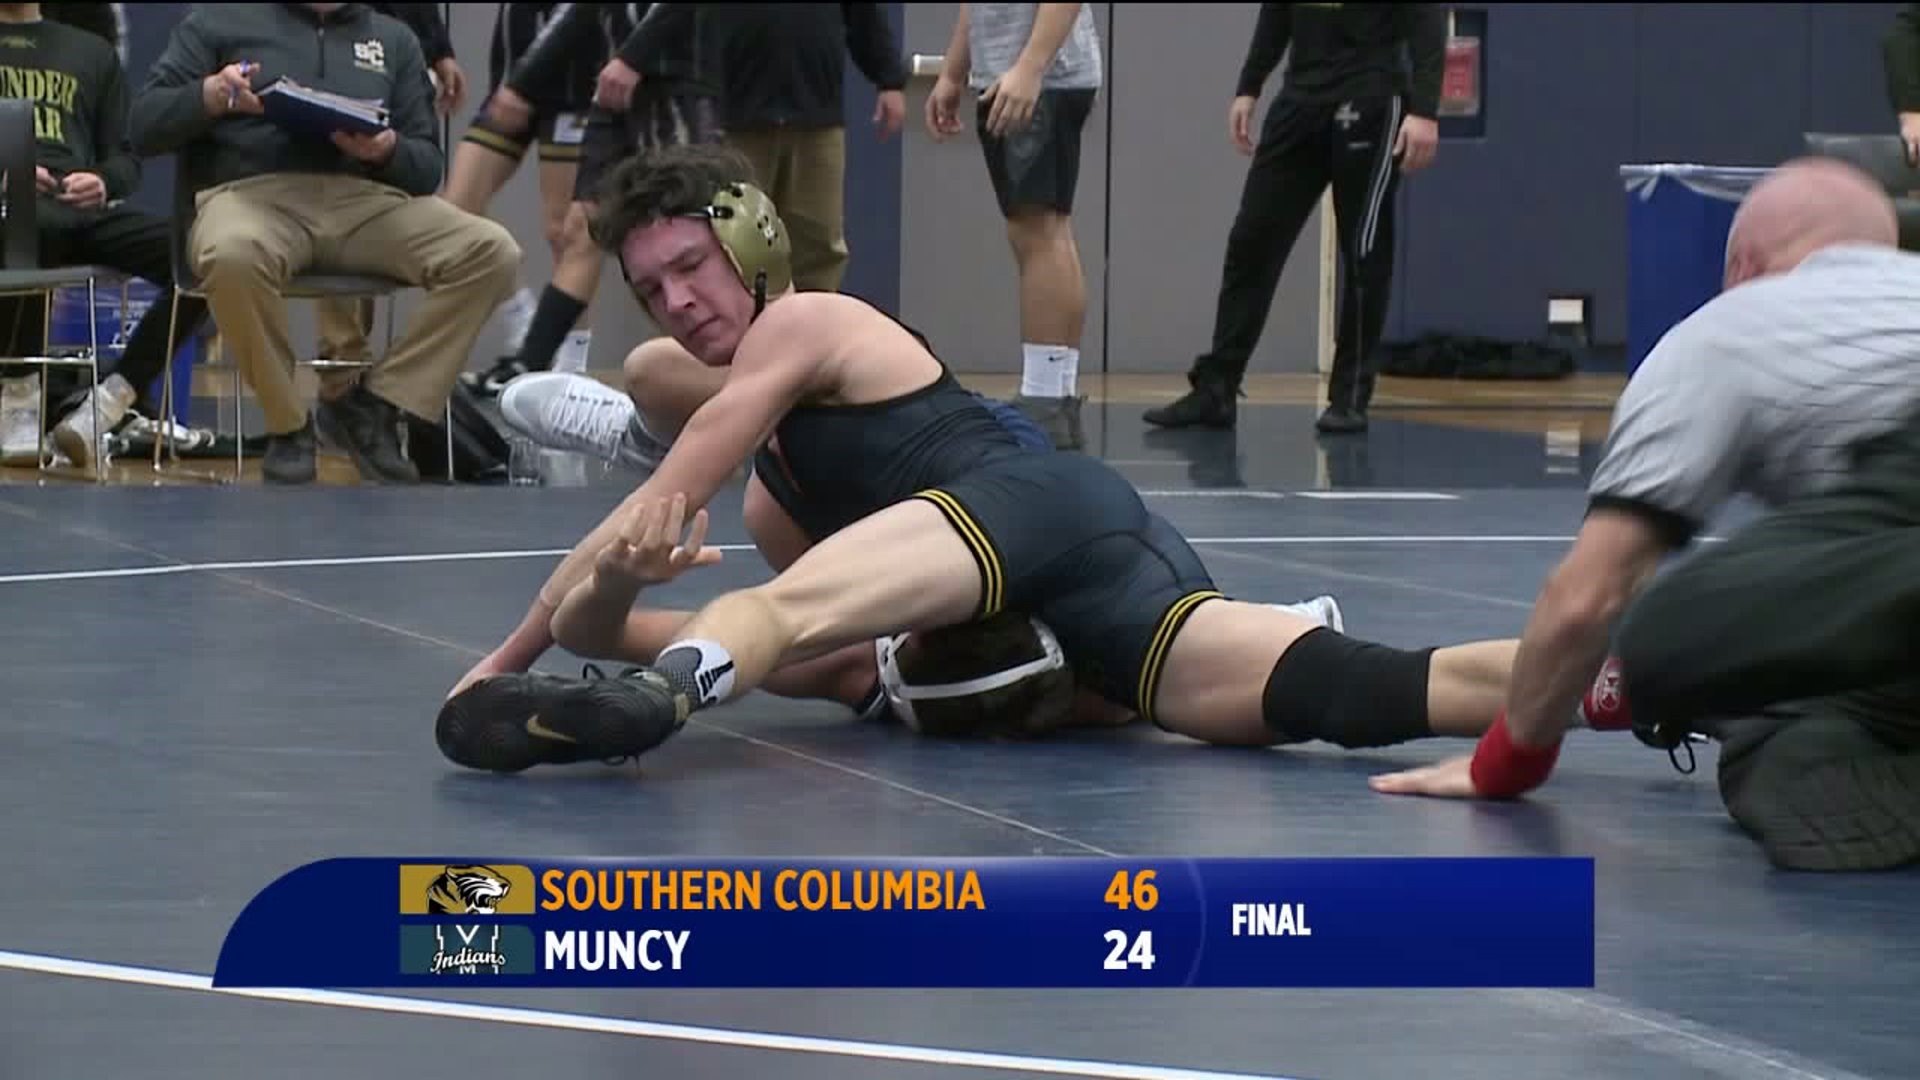 Southern Columbia Beats Muncy in Highly-Anticipated Wrestling Dual